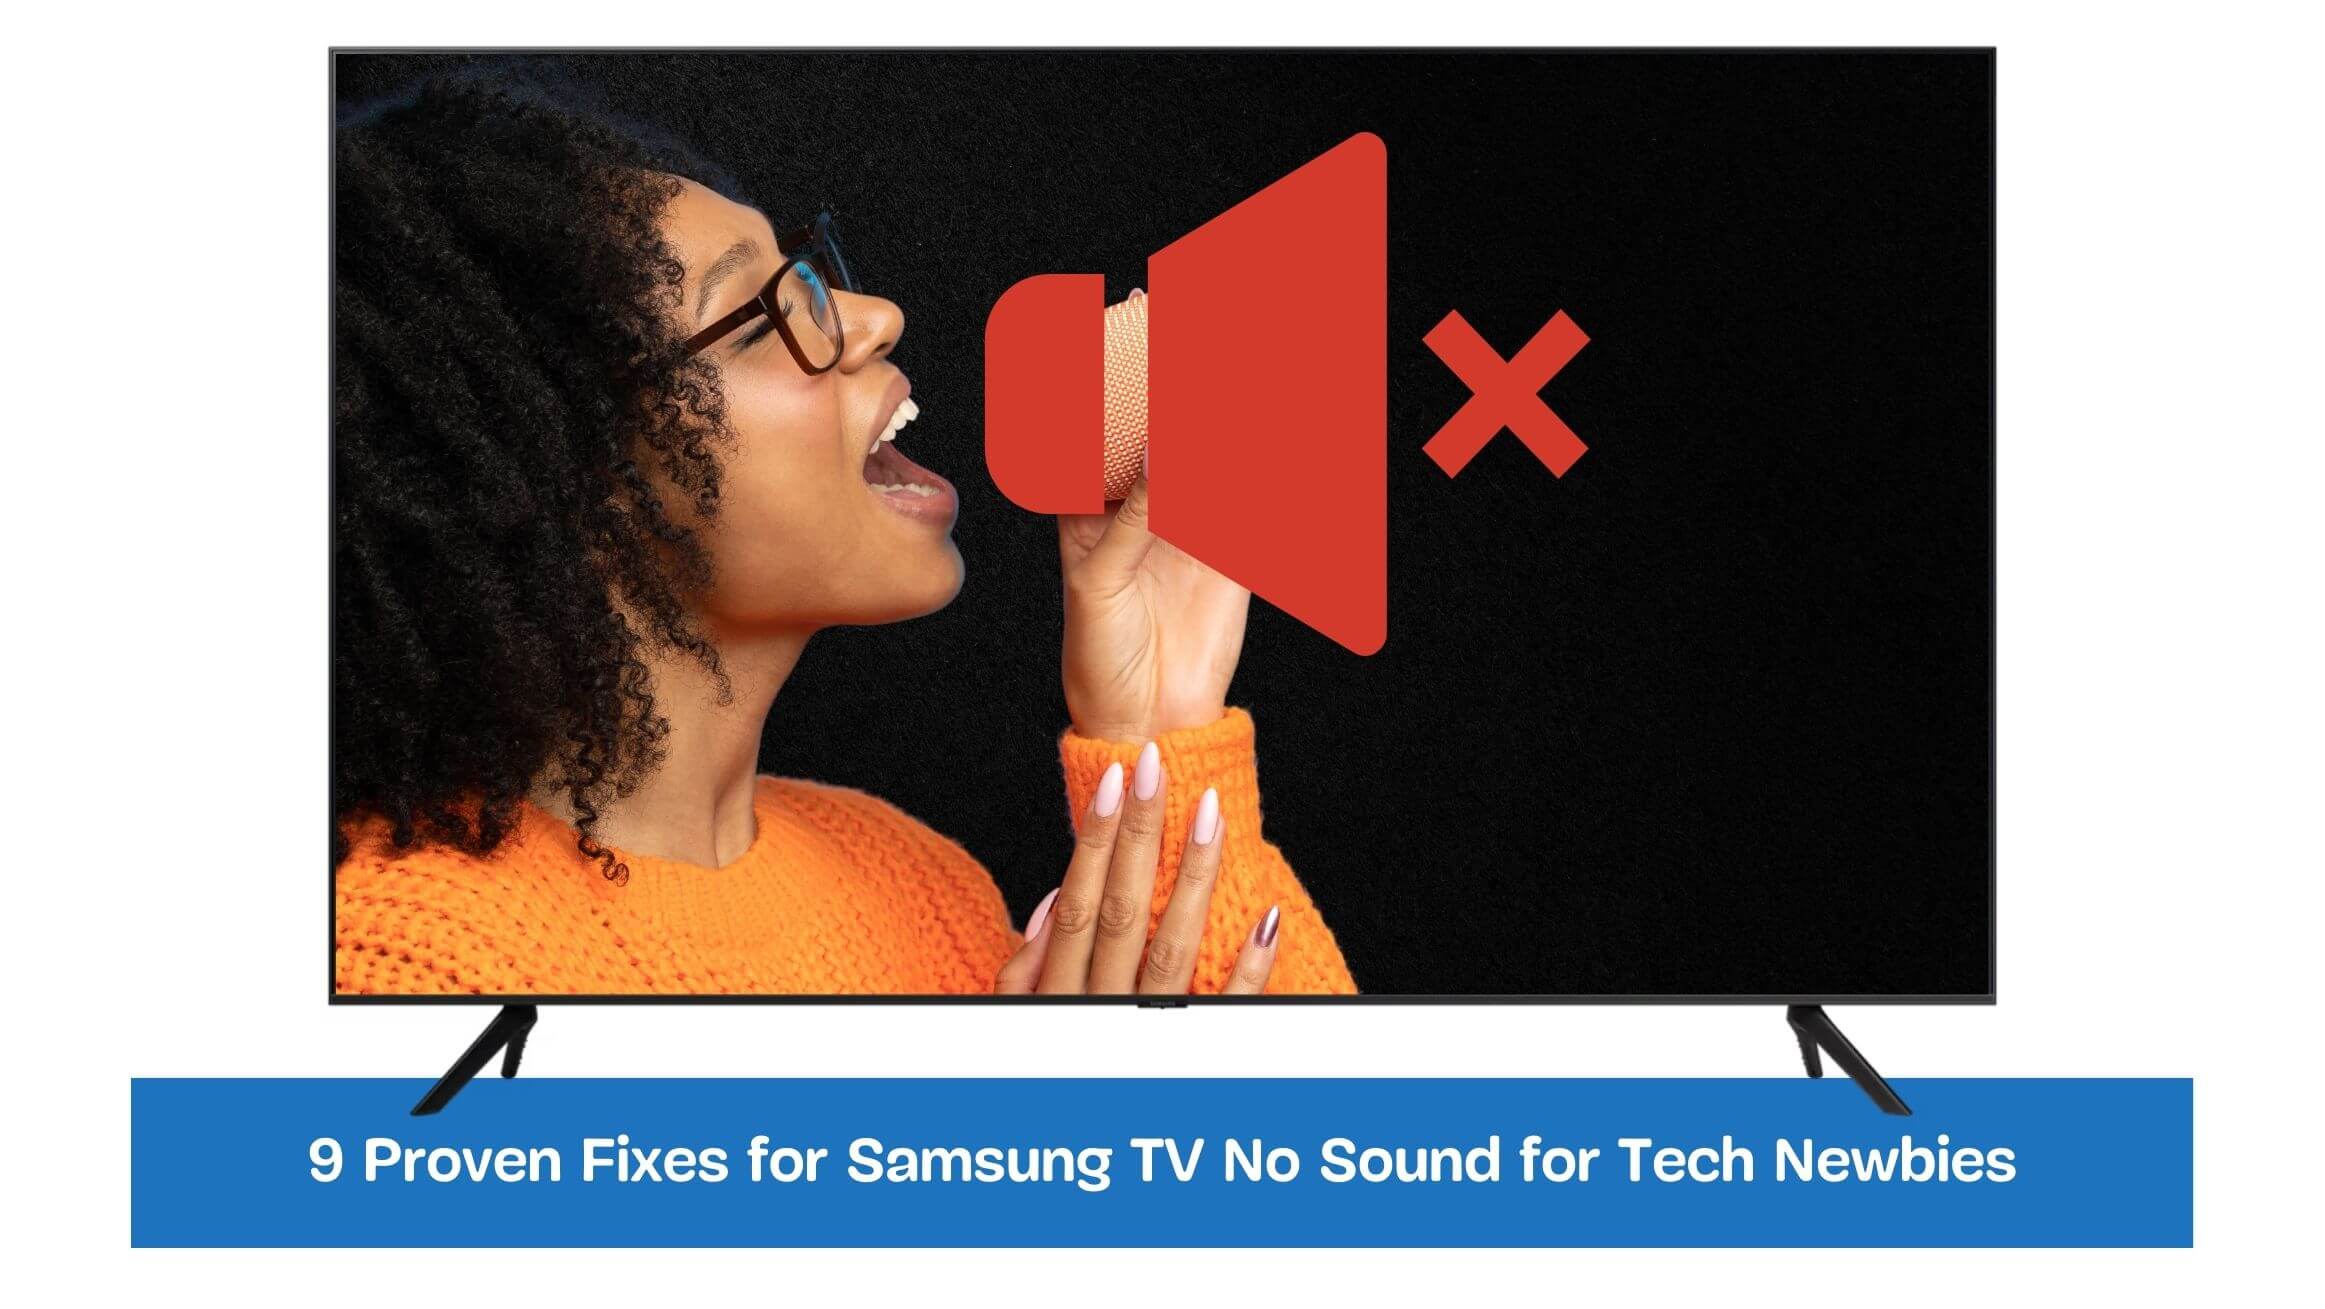 9 Proven Fixes for Samsung TV No Sound for Tech Newbies